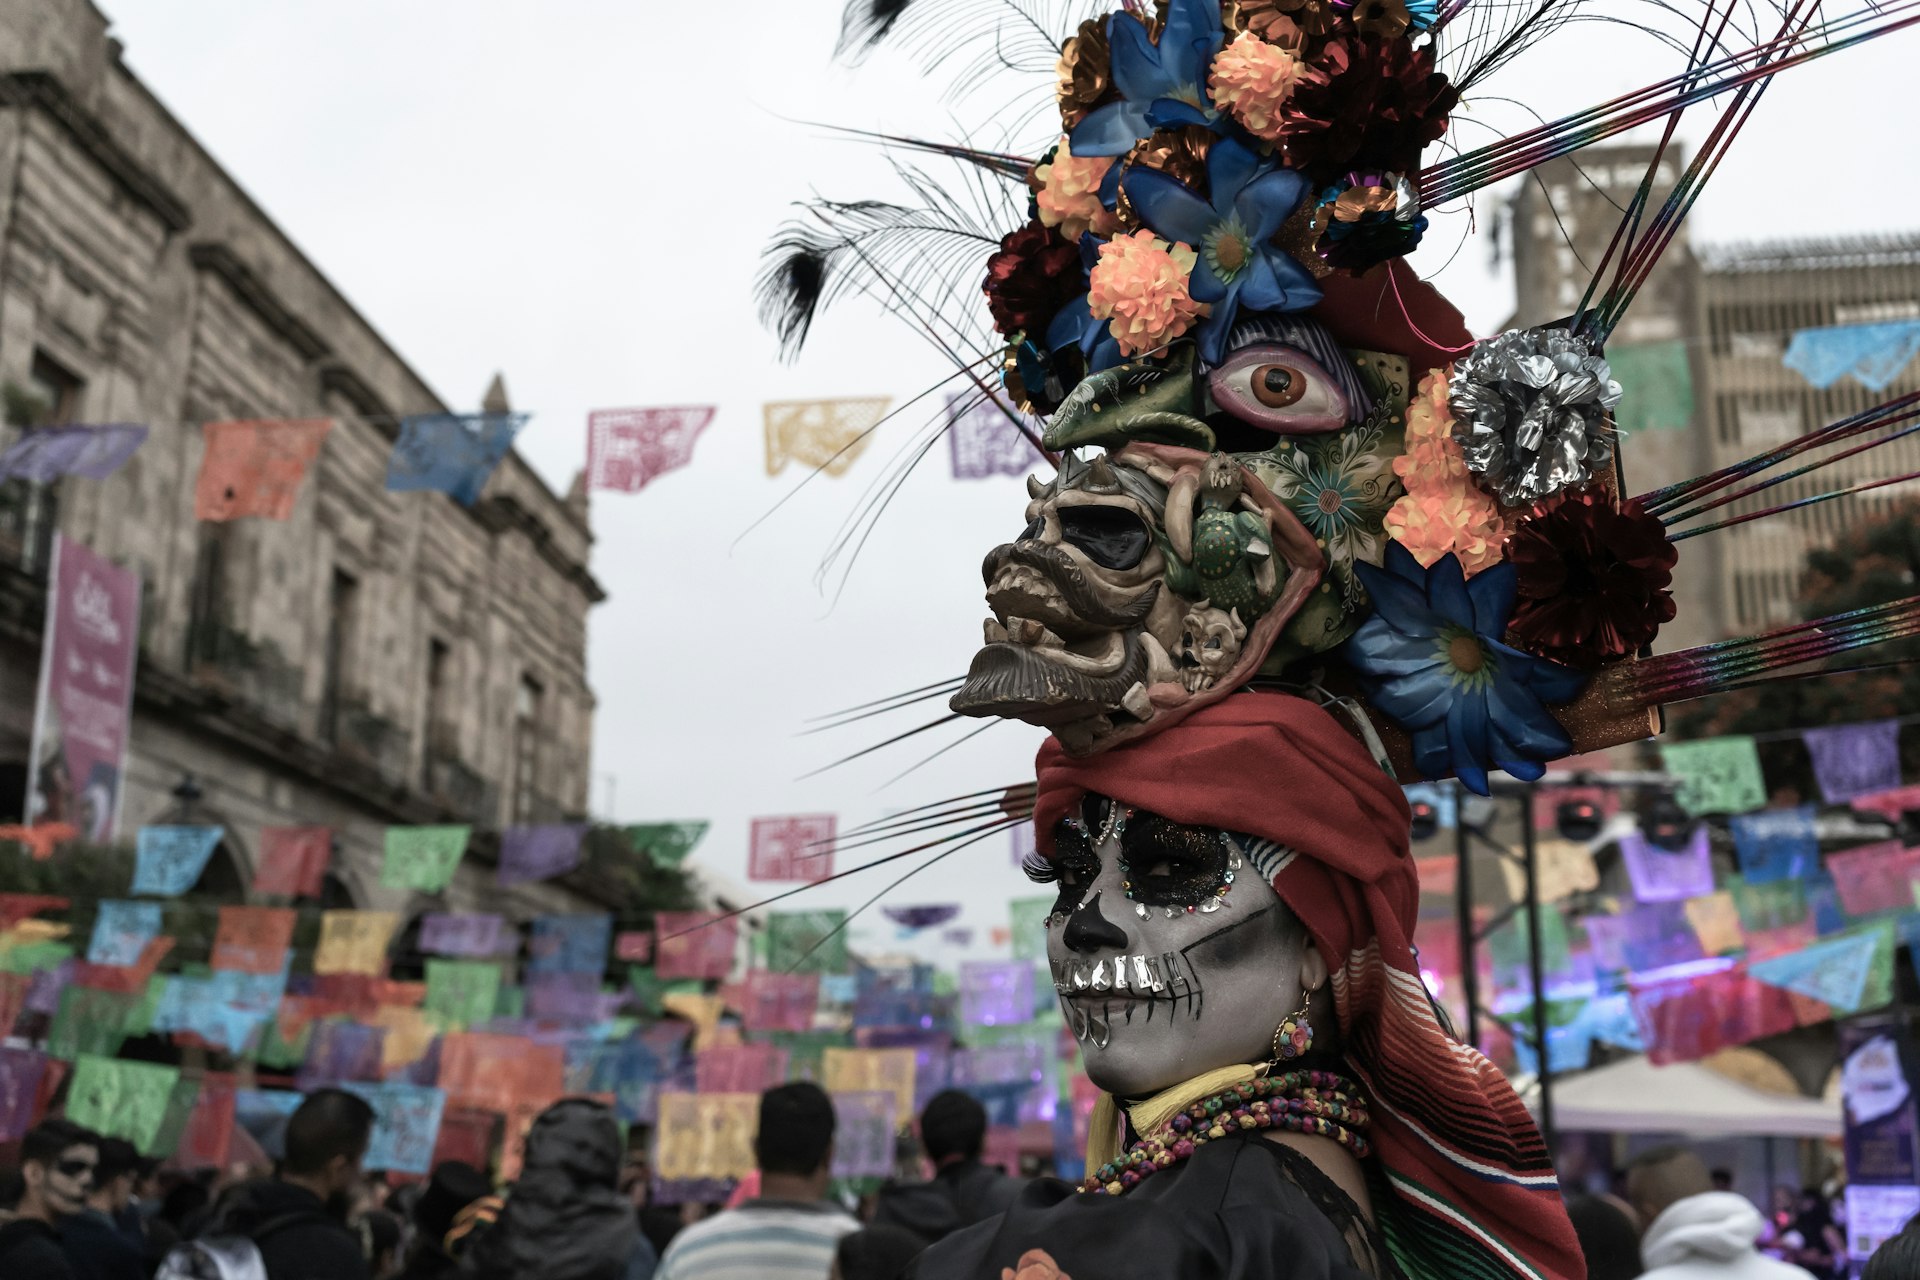 A woman has her face painted like a skull and wears an intricate head-dress made of skulls and flowers